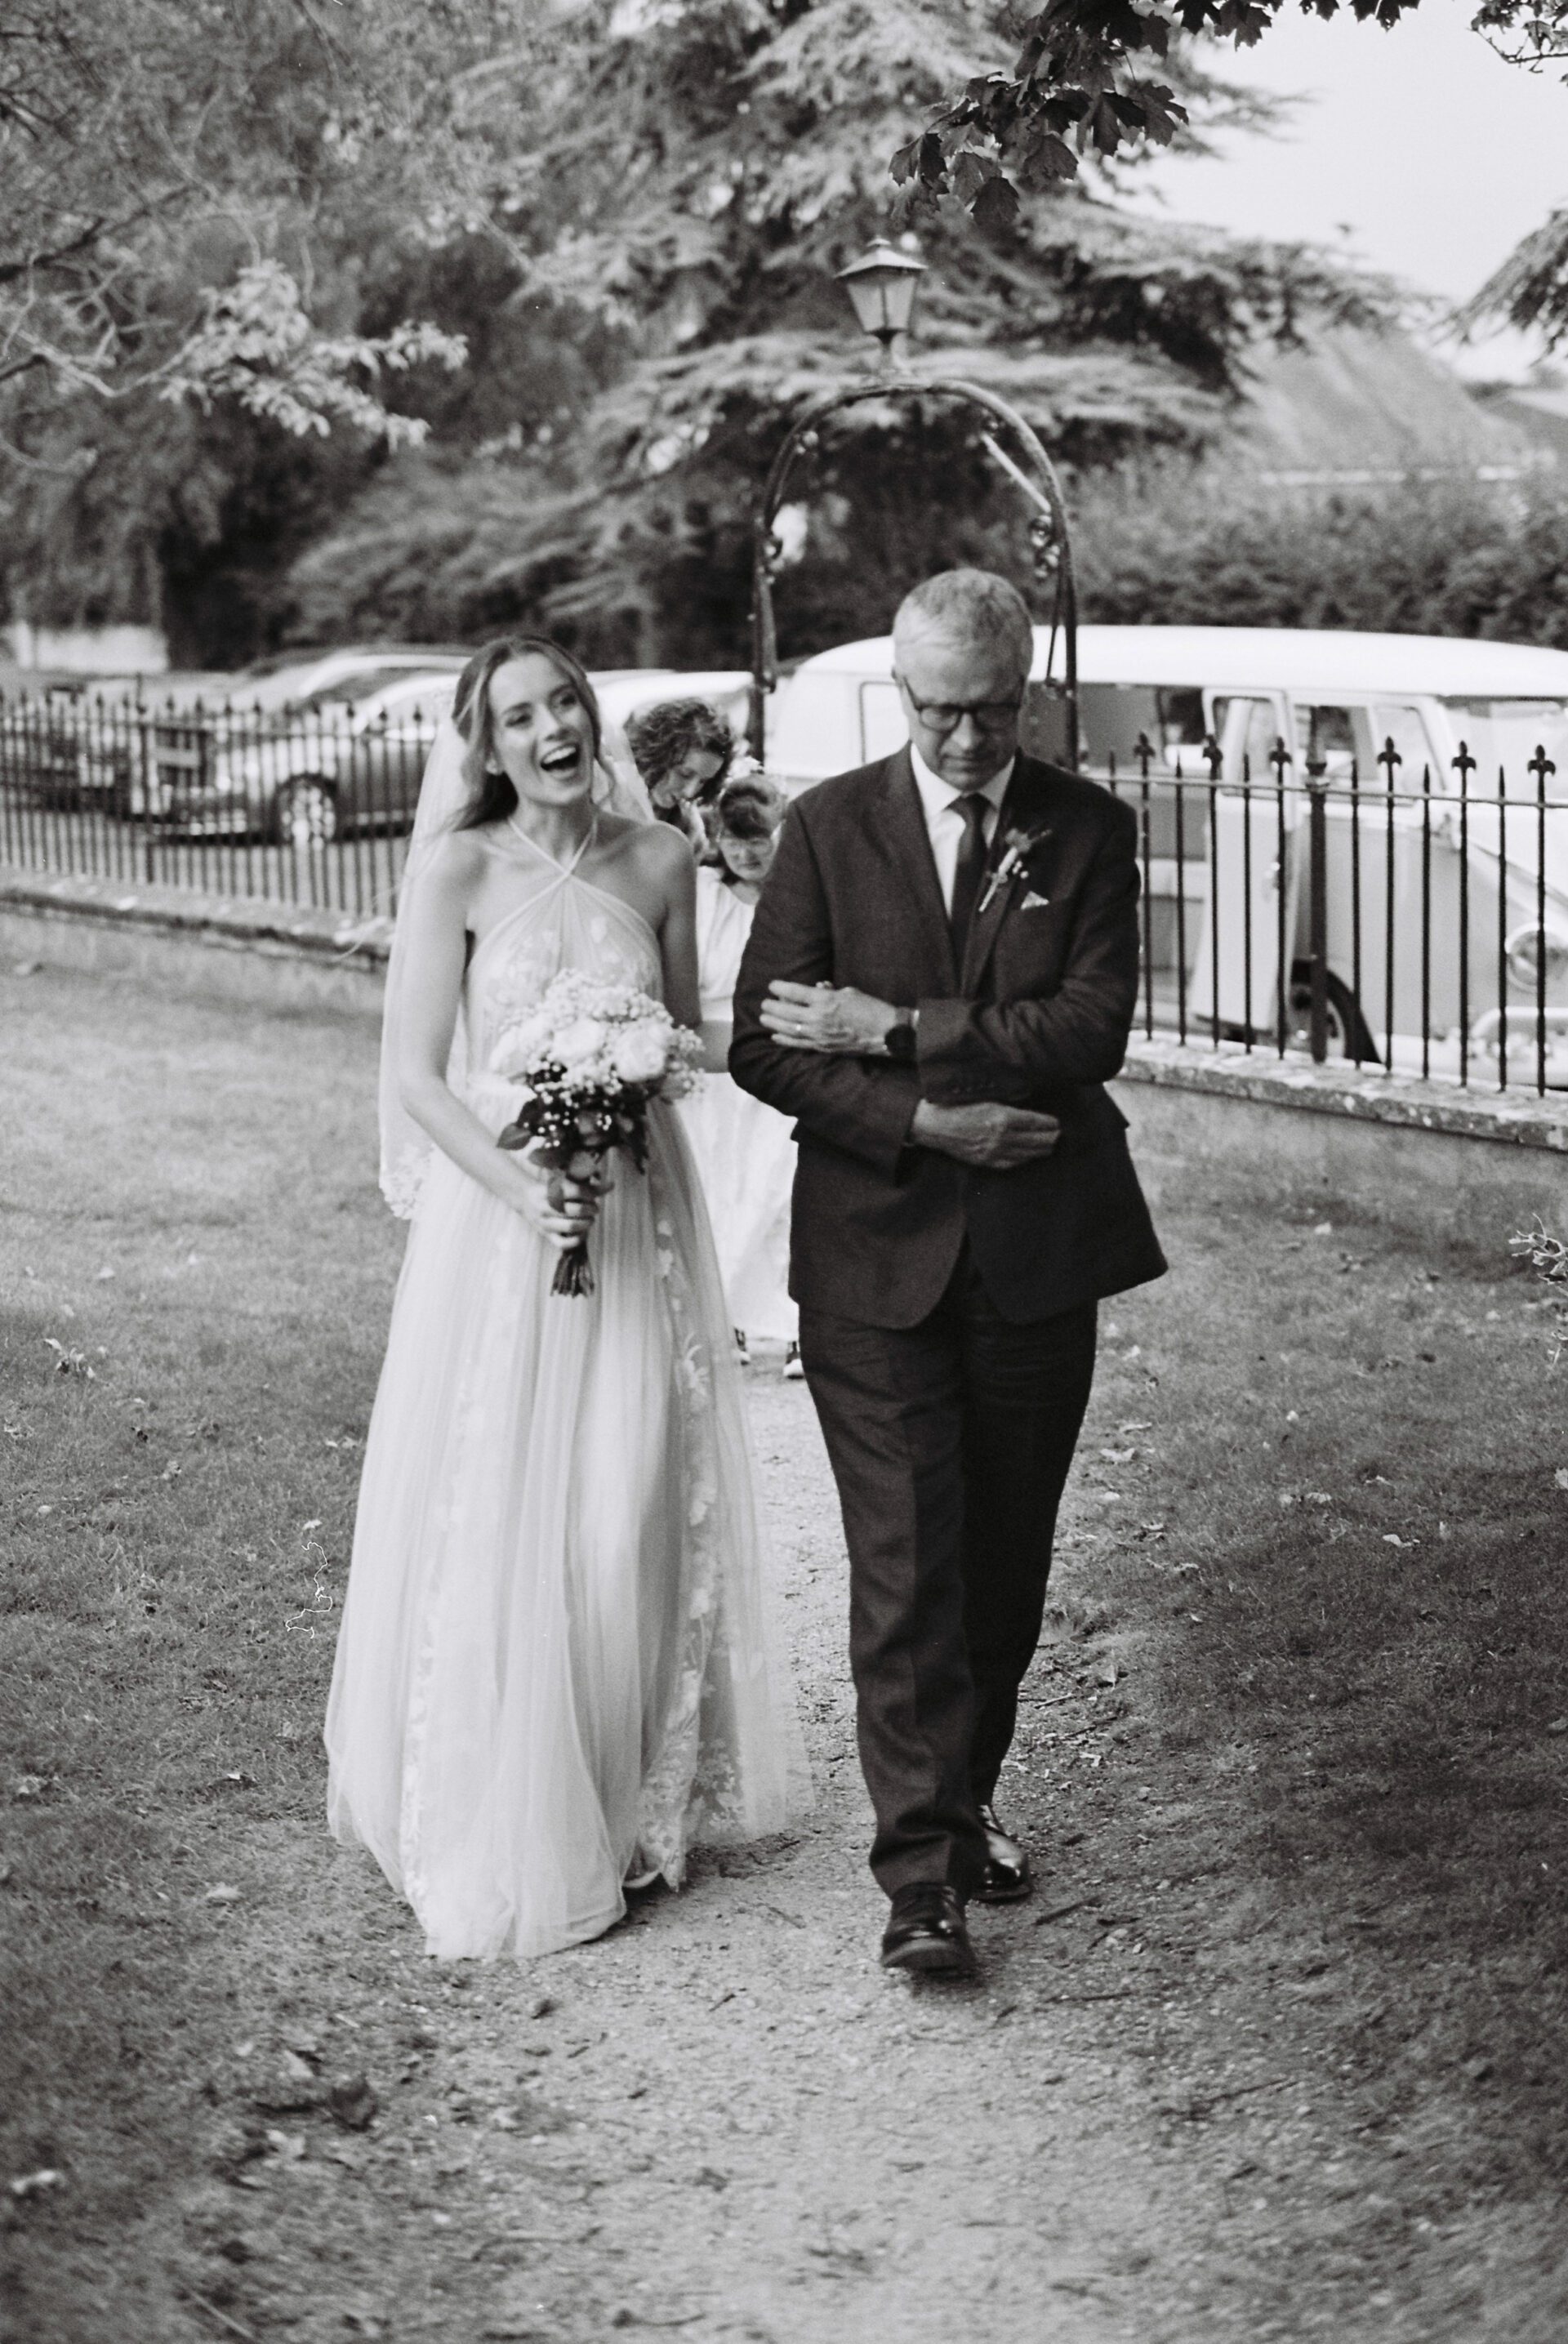 The bride arrives at the church with her father, captured on 35mm film